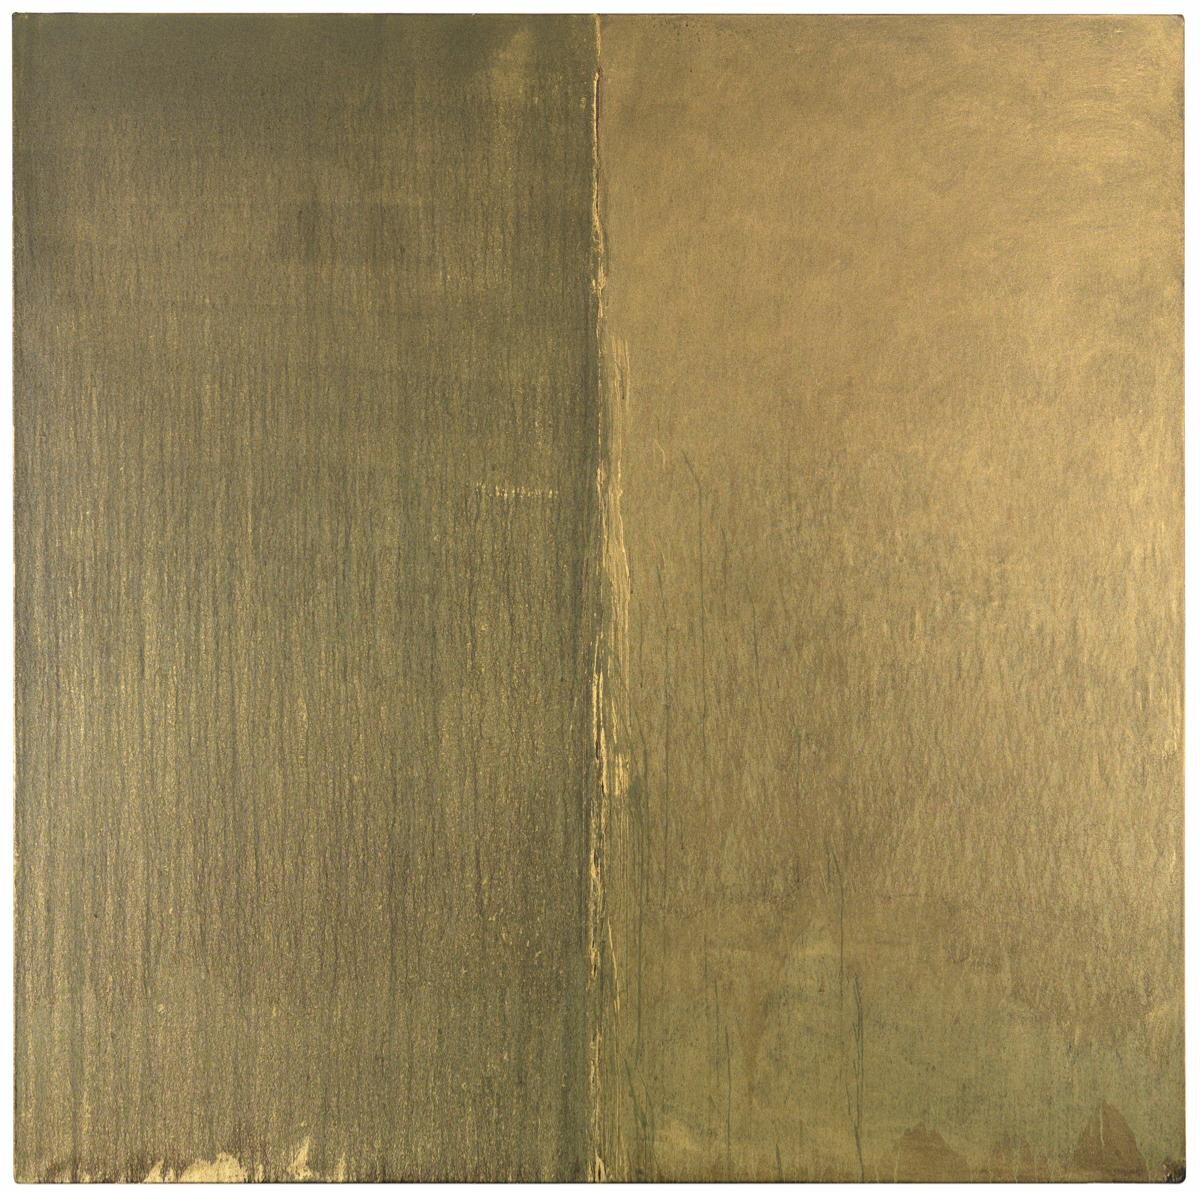  Pat Steir -  Two Golds  (2009-10), Oil on canvas, 84 x 84 in. - Photo Courtesy of Cheim &amp; Read, New York 